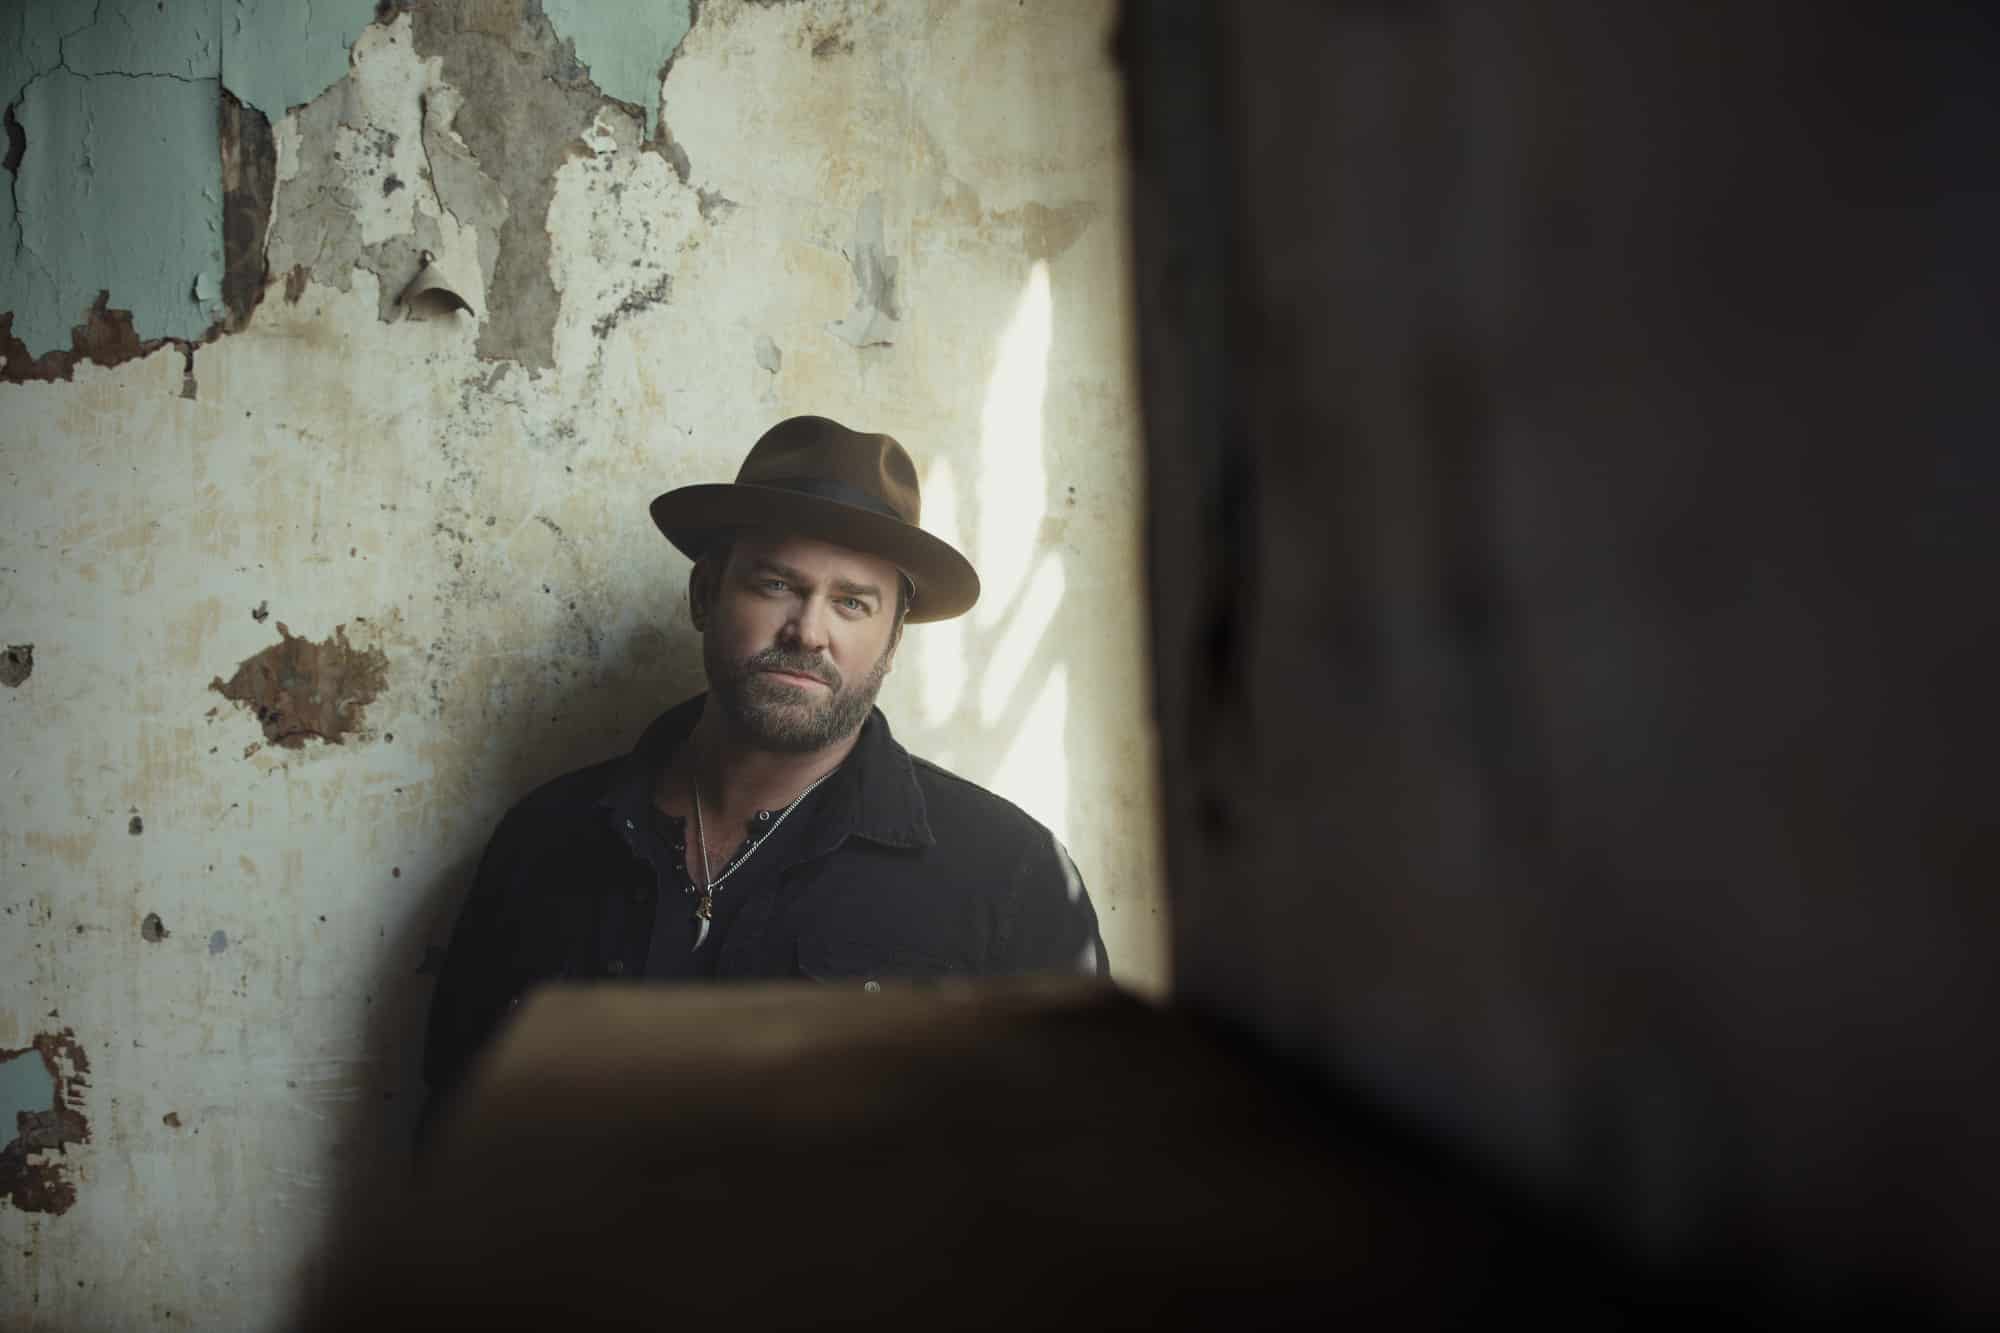 Lee Brice Headlining Latest Songwriters’ Café with Whitney Duncan and Teddy Robb to Benefit Families of Our Country’s Fallen Heroes